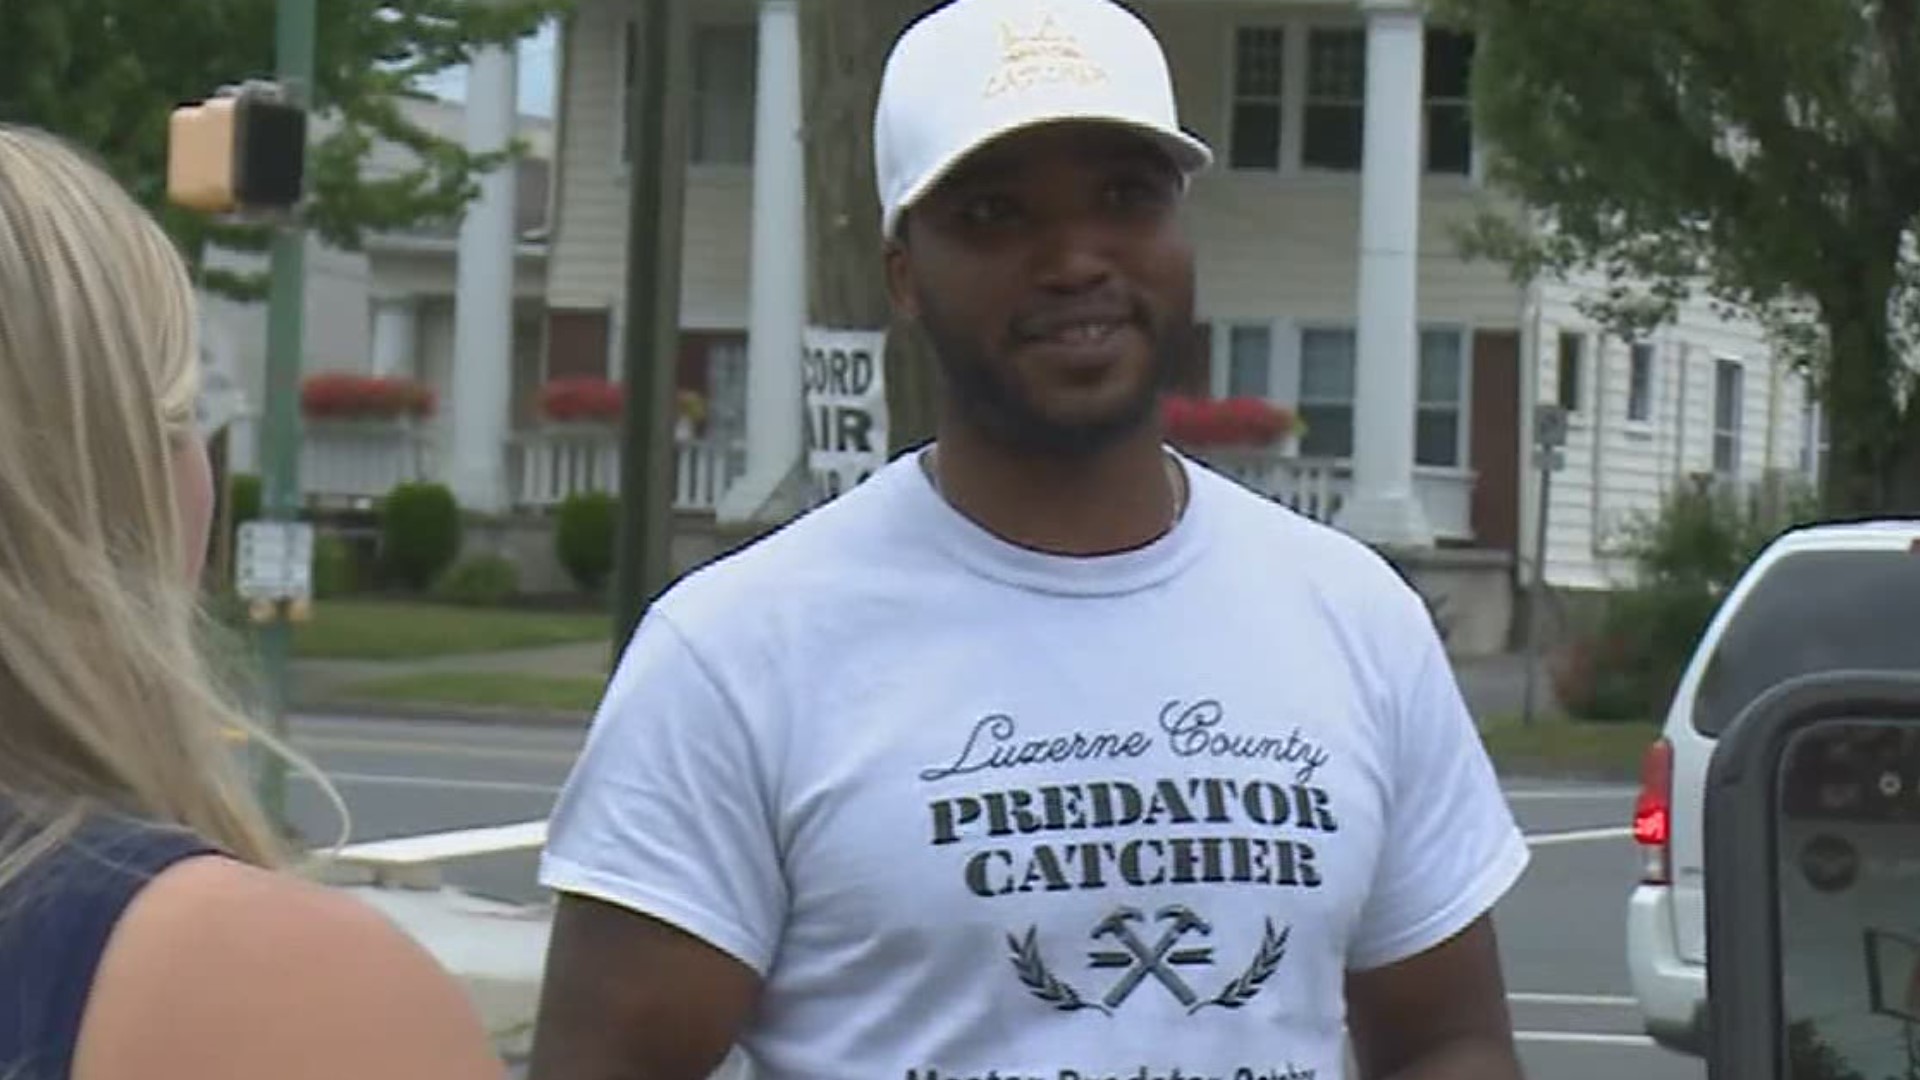 A man is taking matters into his own hands to catch child predators. But who is he, and is what he's doing legal? We introduce you to the "Predator Catcher."